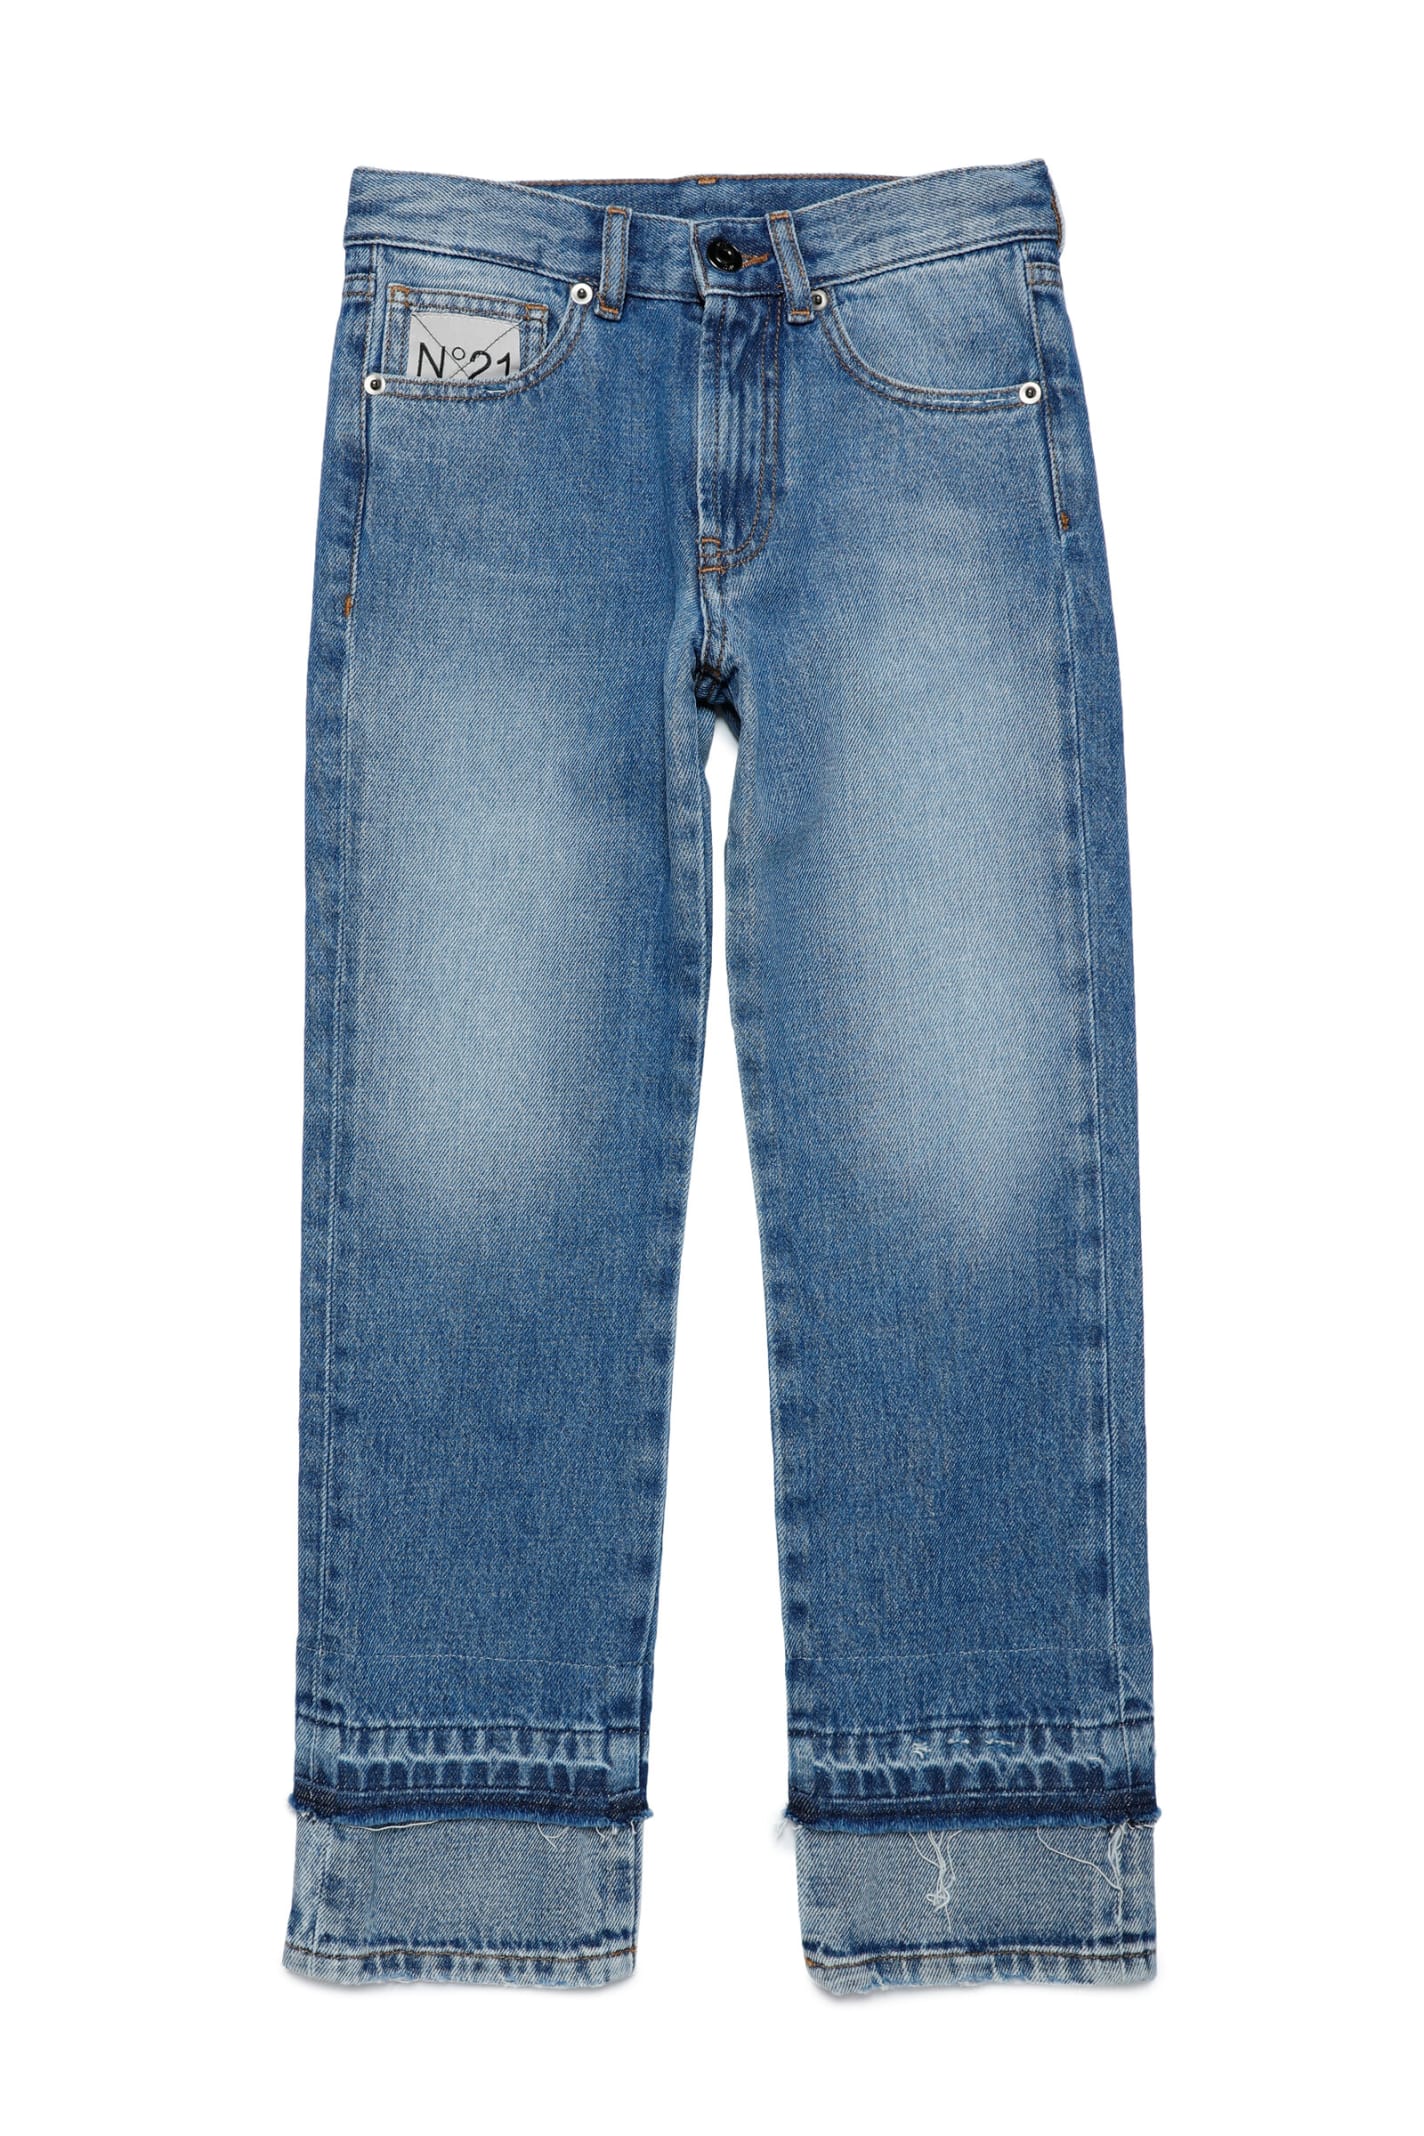 N°21 N21P173F TROUSERS N°21 SHADED BLUE DENIM JEANS WITH DOUBLE LAYER BOTTOMS